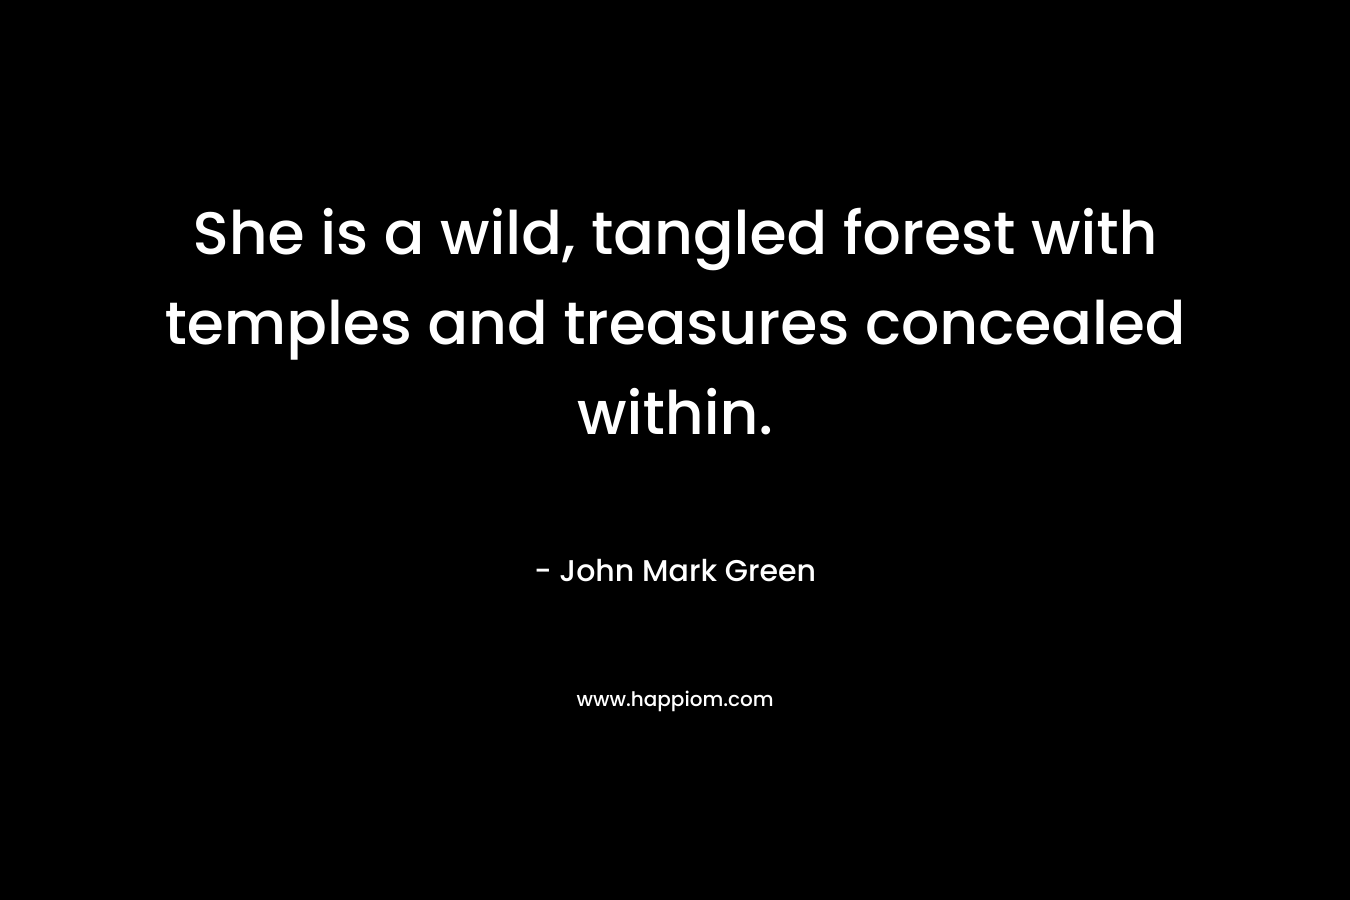 She is a wild, tangled forest with temples and treasures concealed within.